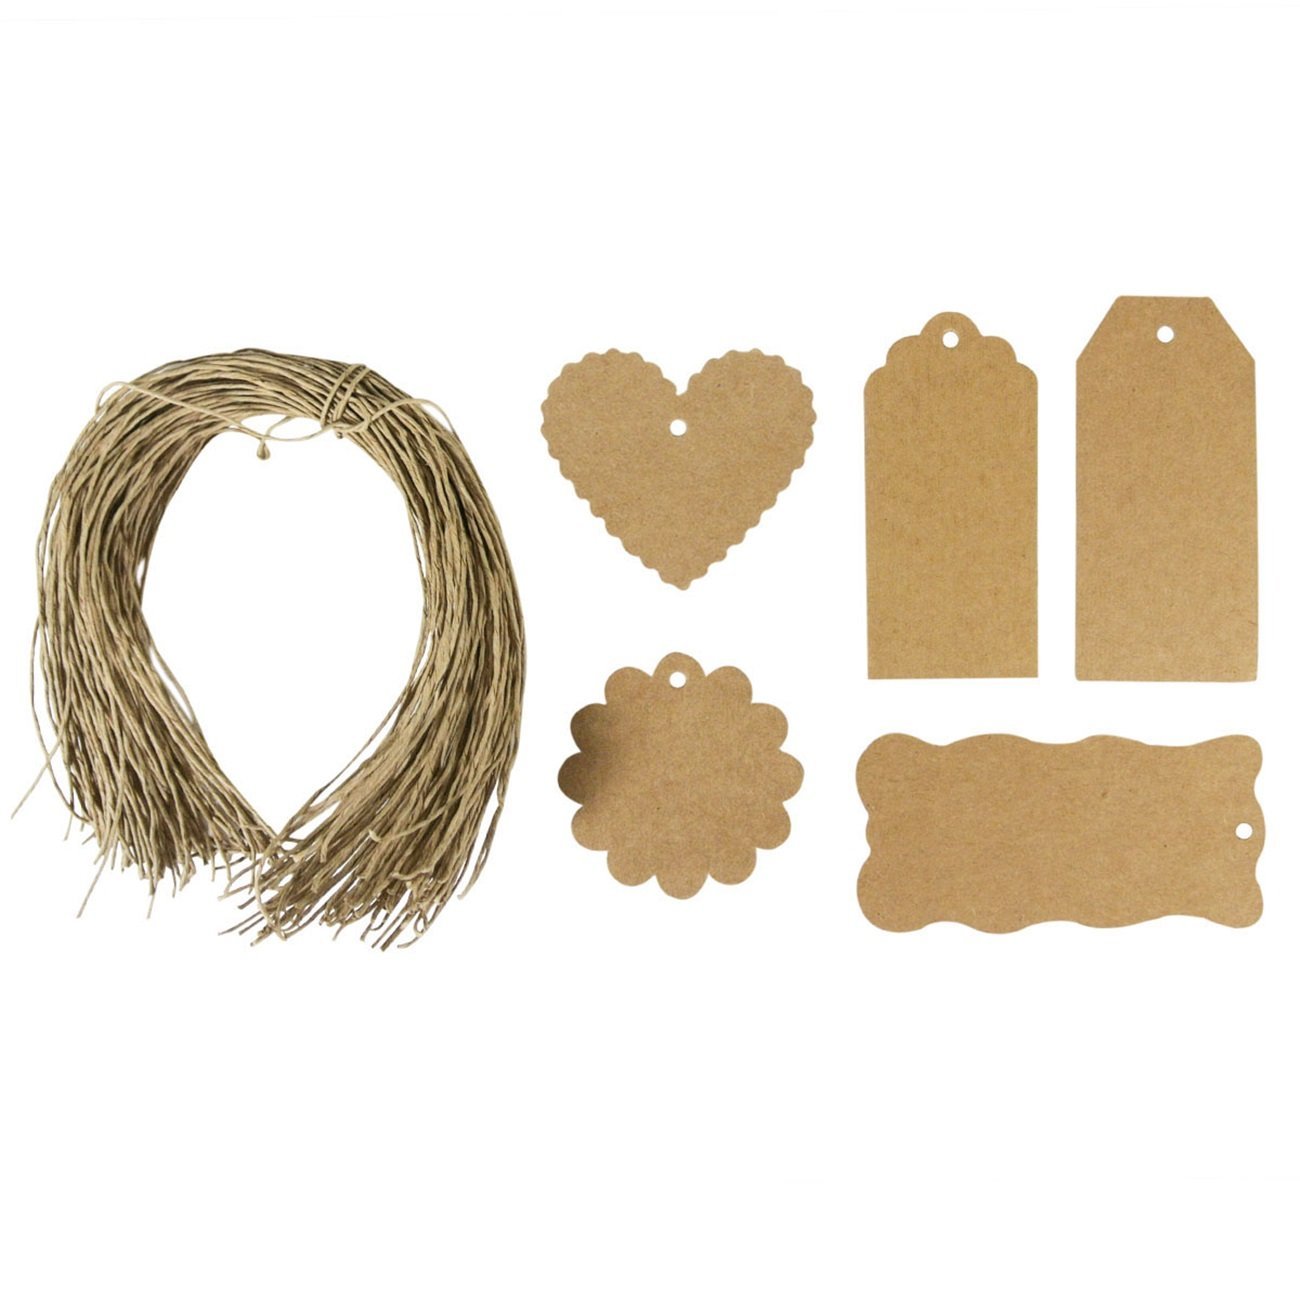 Wrapables 100-Count Brown Gift Tags with Free Cut String for Gifts Crafts and Price Tags Plus Cotton Baker's Twine, 12 Ply/110-Yard, White/Gold